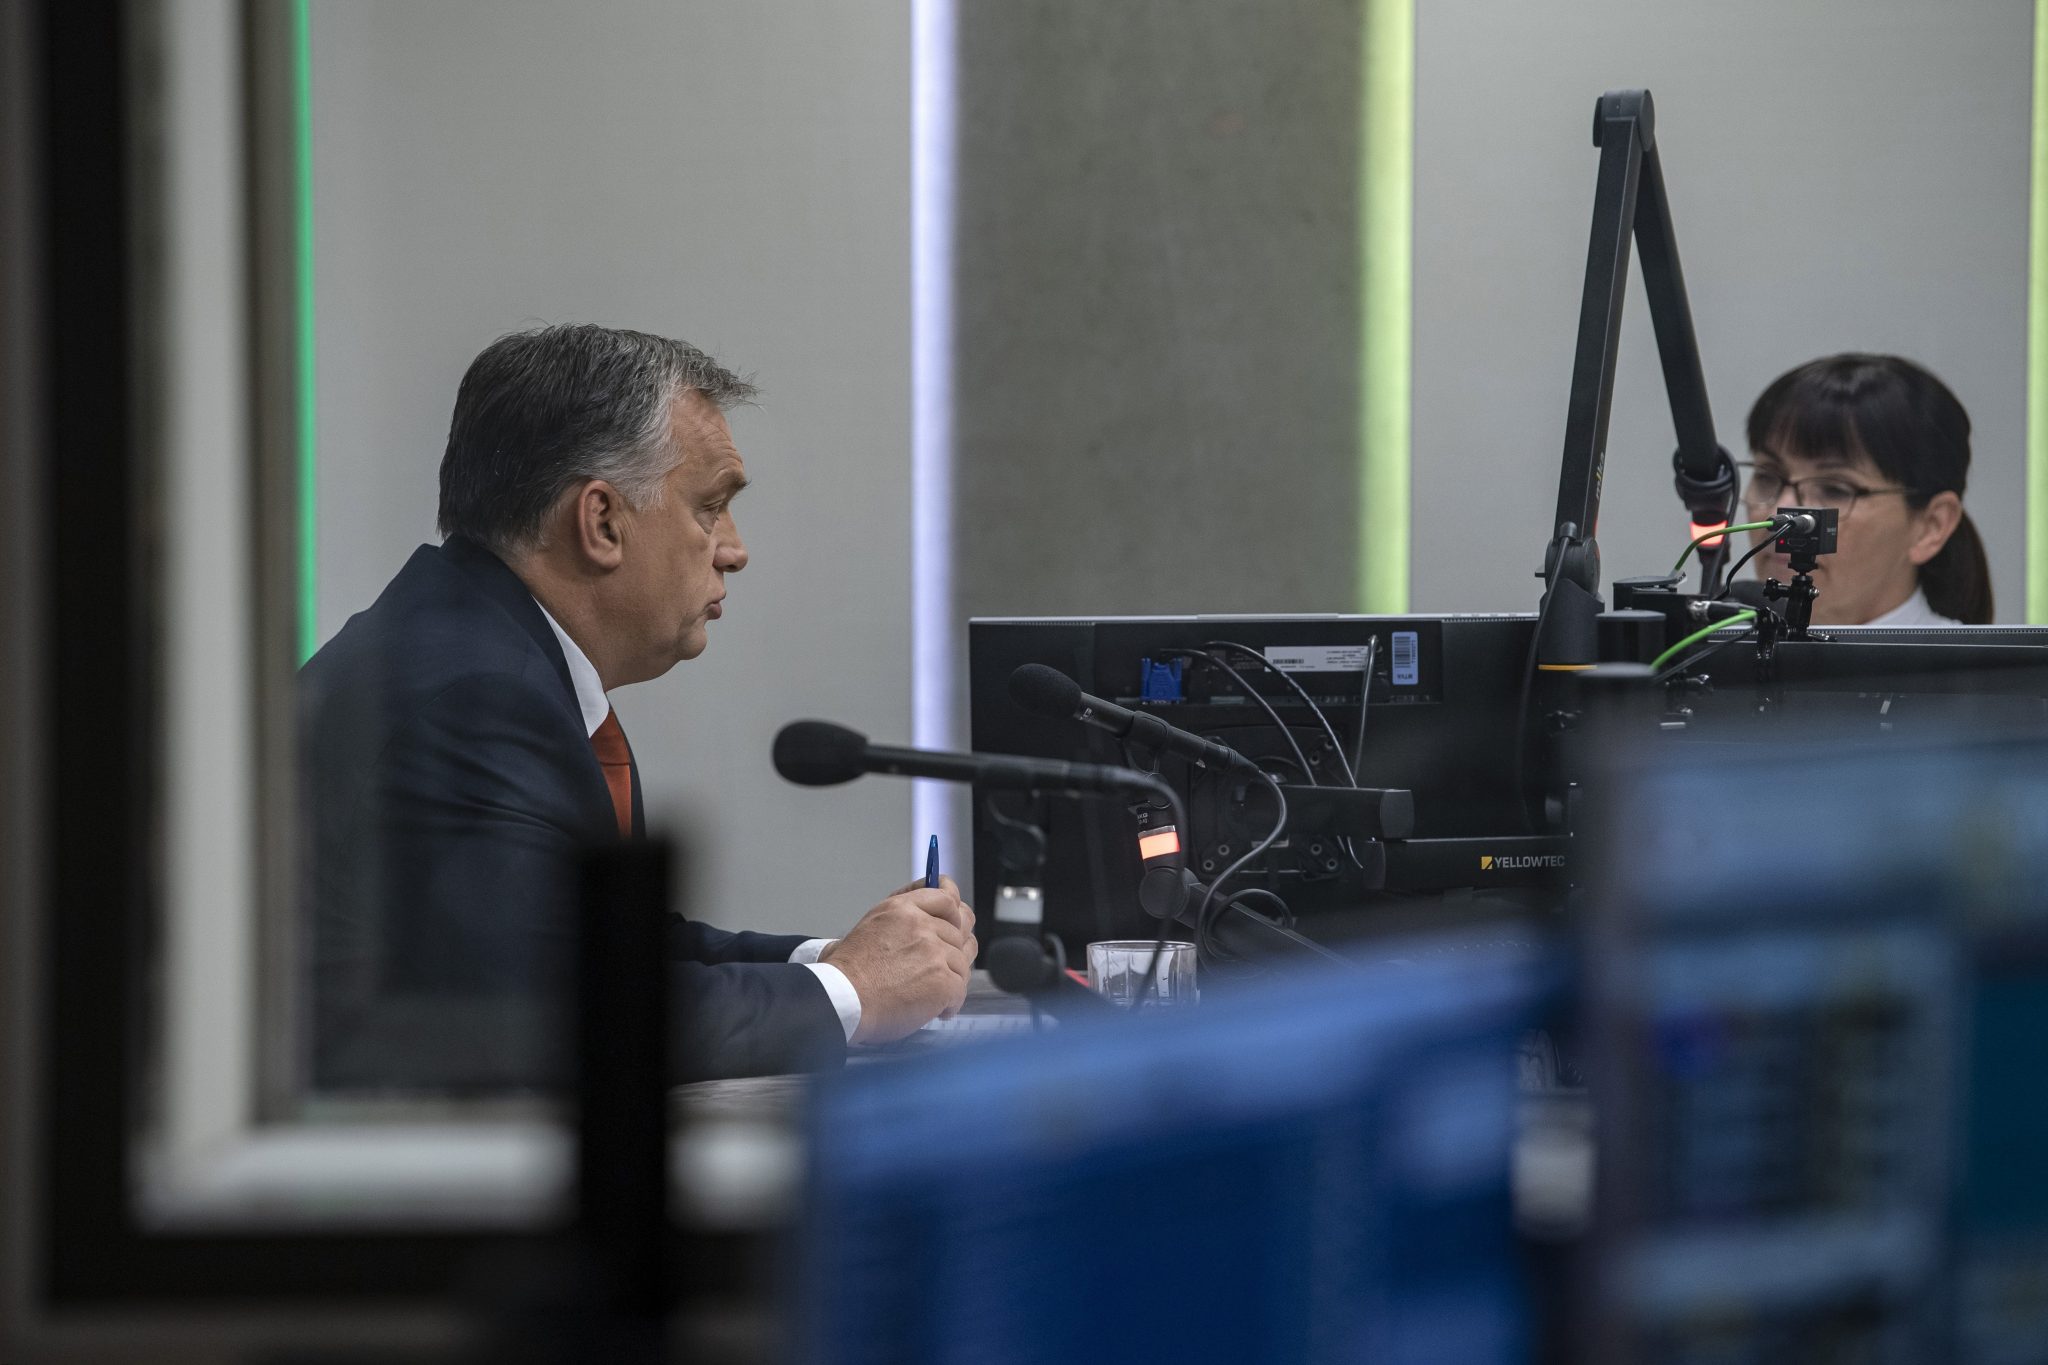 Coronavirus - Orbán: Too Early to Lift Restrictions